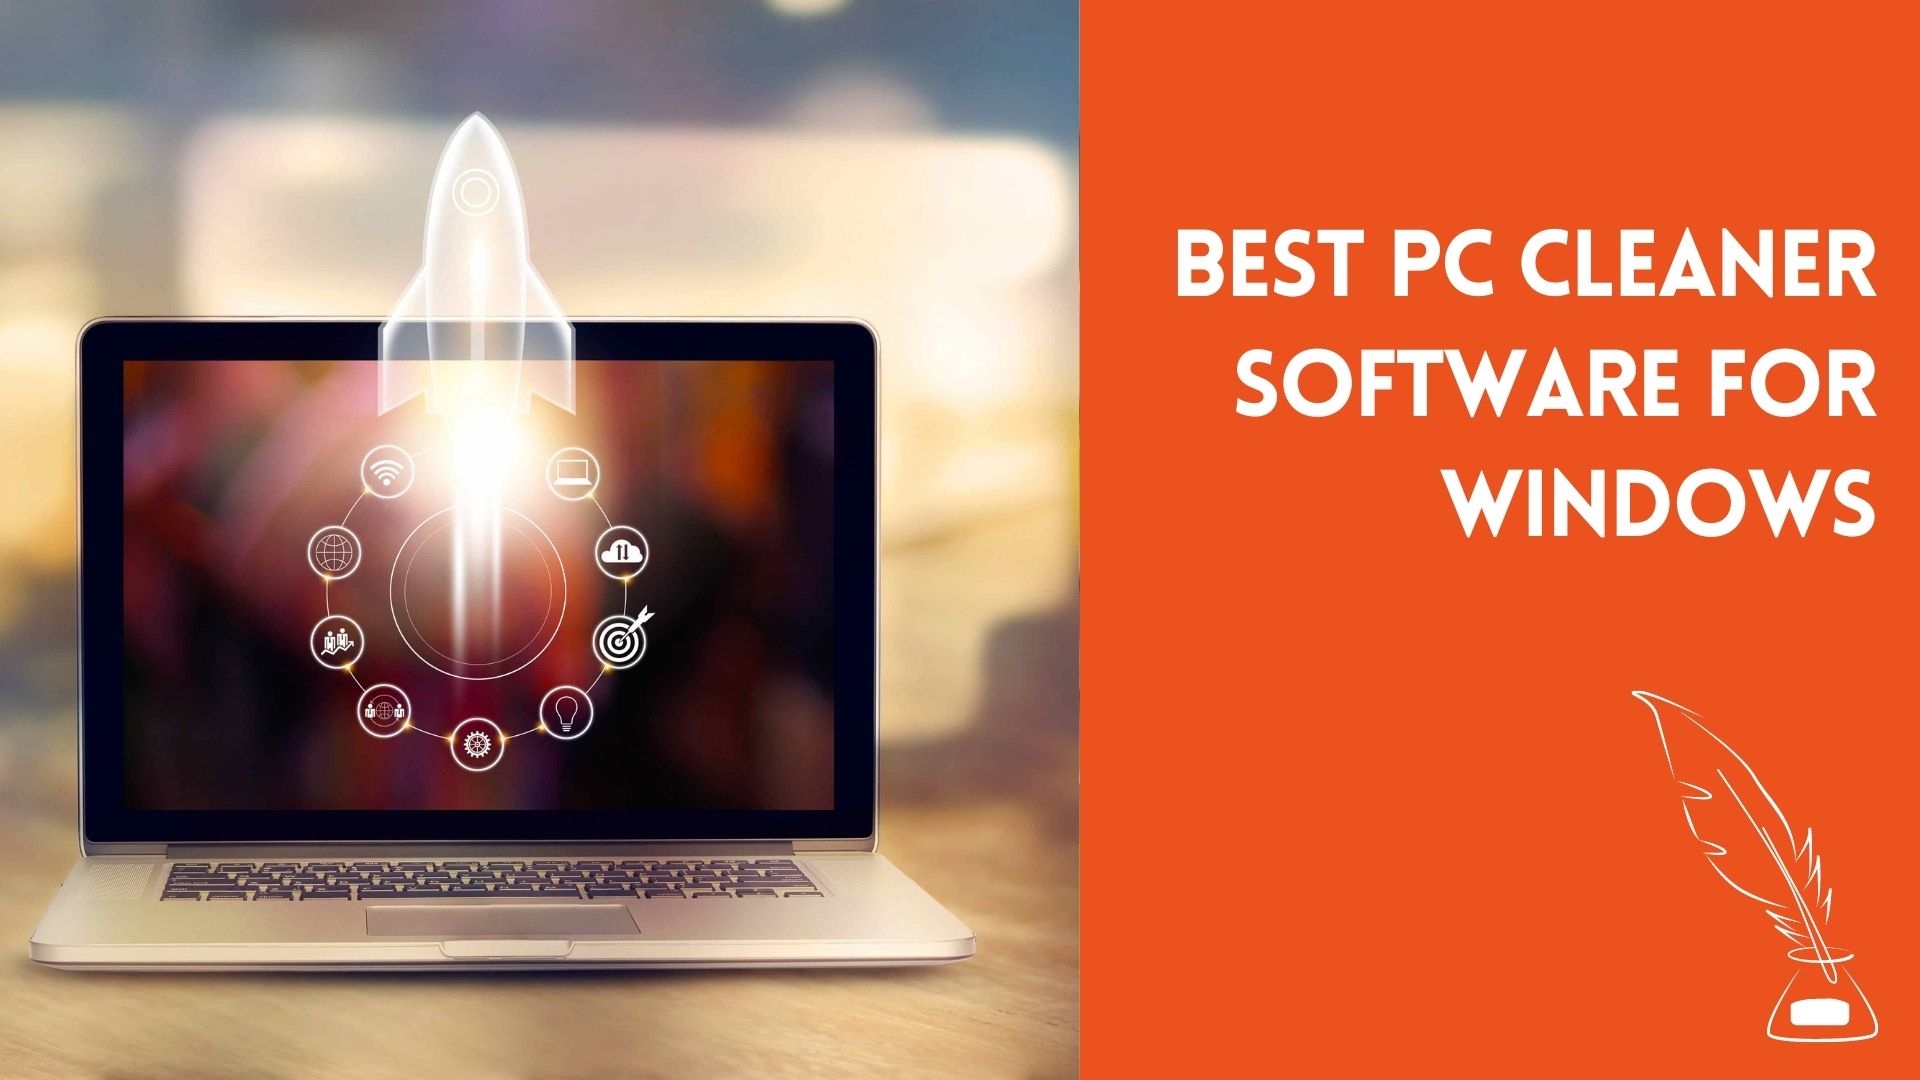 17 Best PC Cleaner Software For Windows | PC Optimizer For 2022